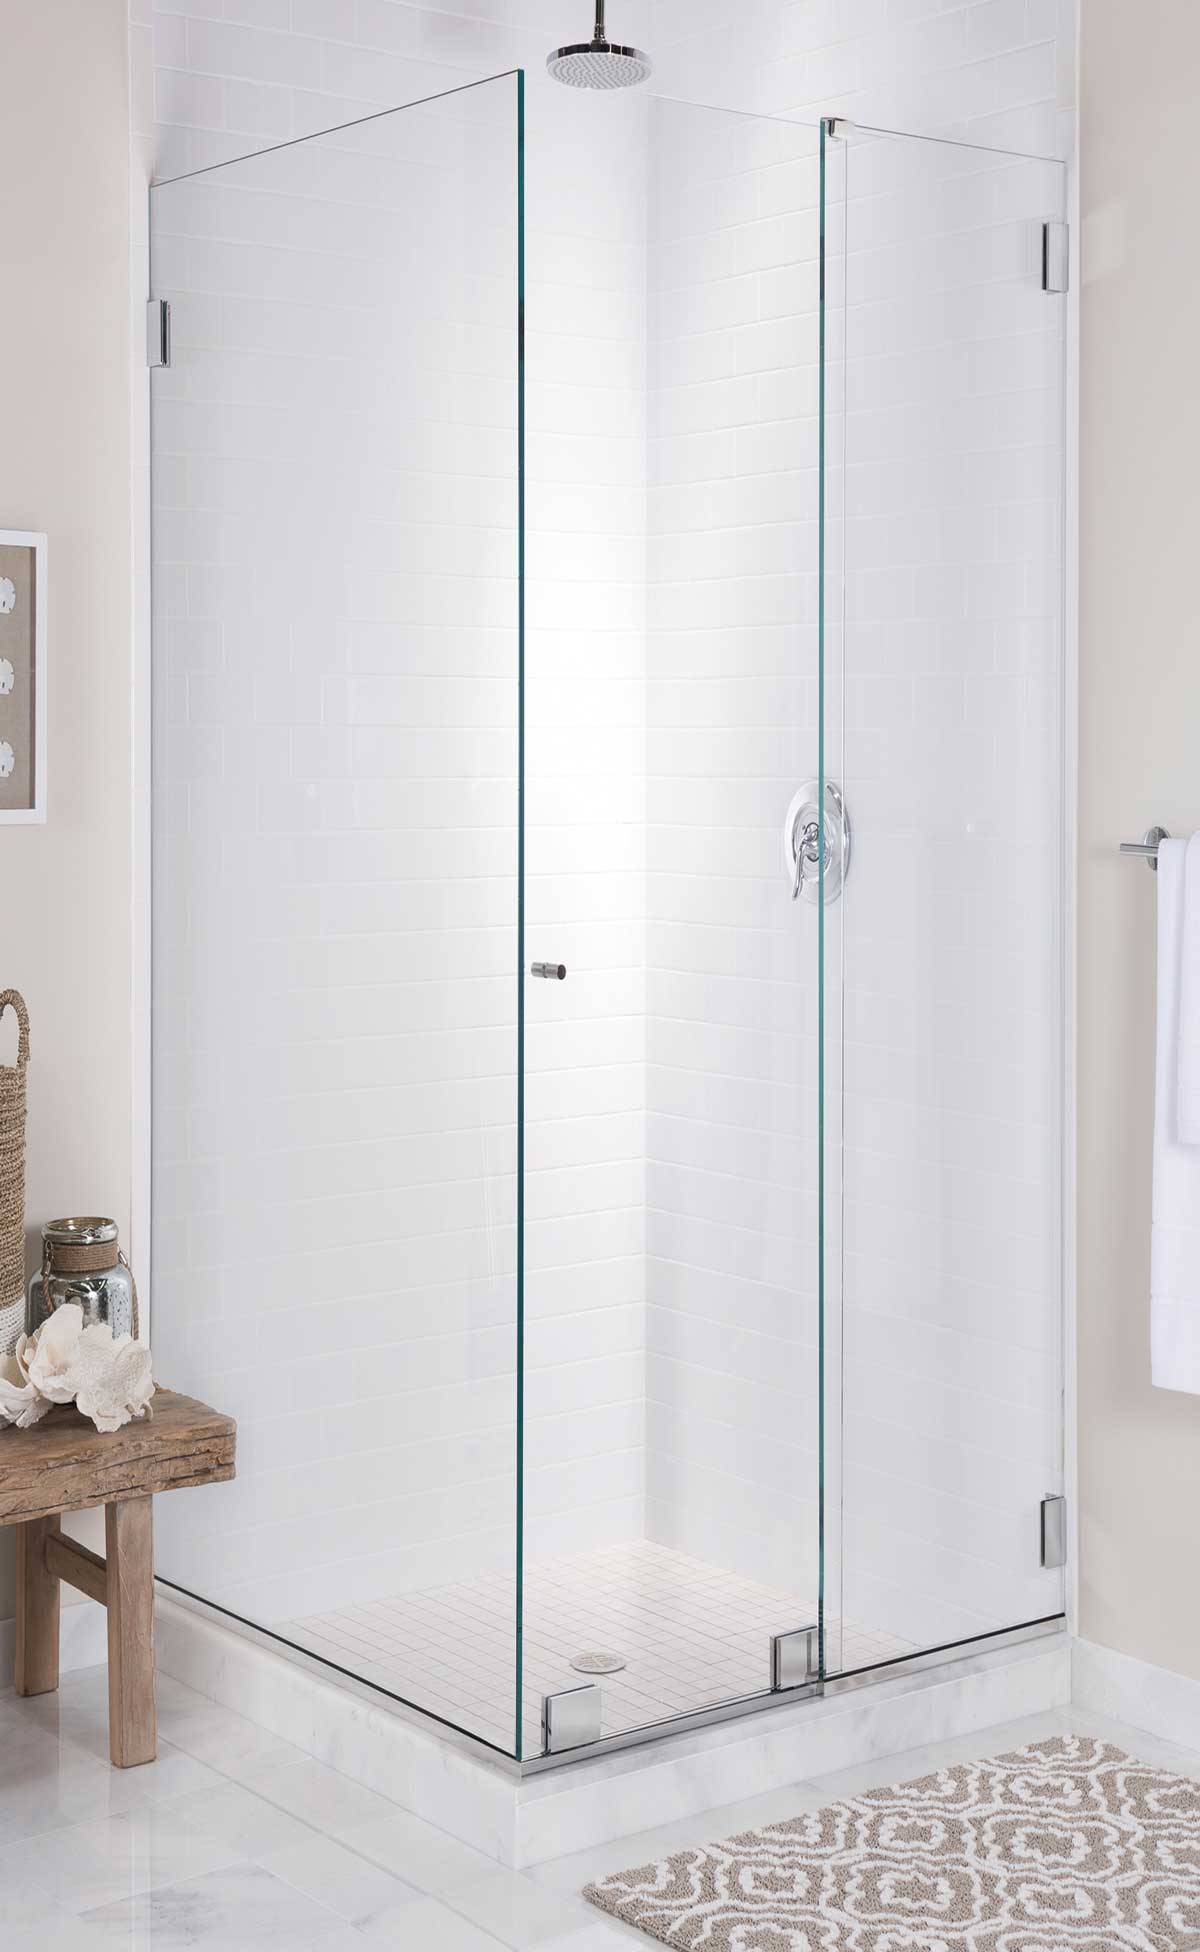 90 degree glass shower enclosure without any framing. Minimalist knob on a sliding door with matching silver shower hardware.